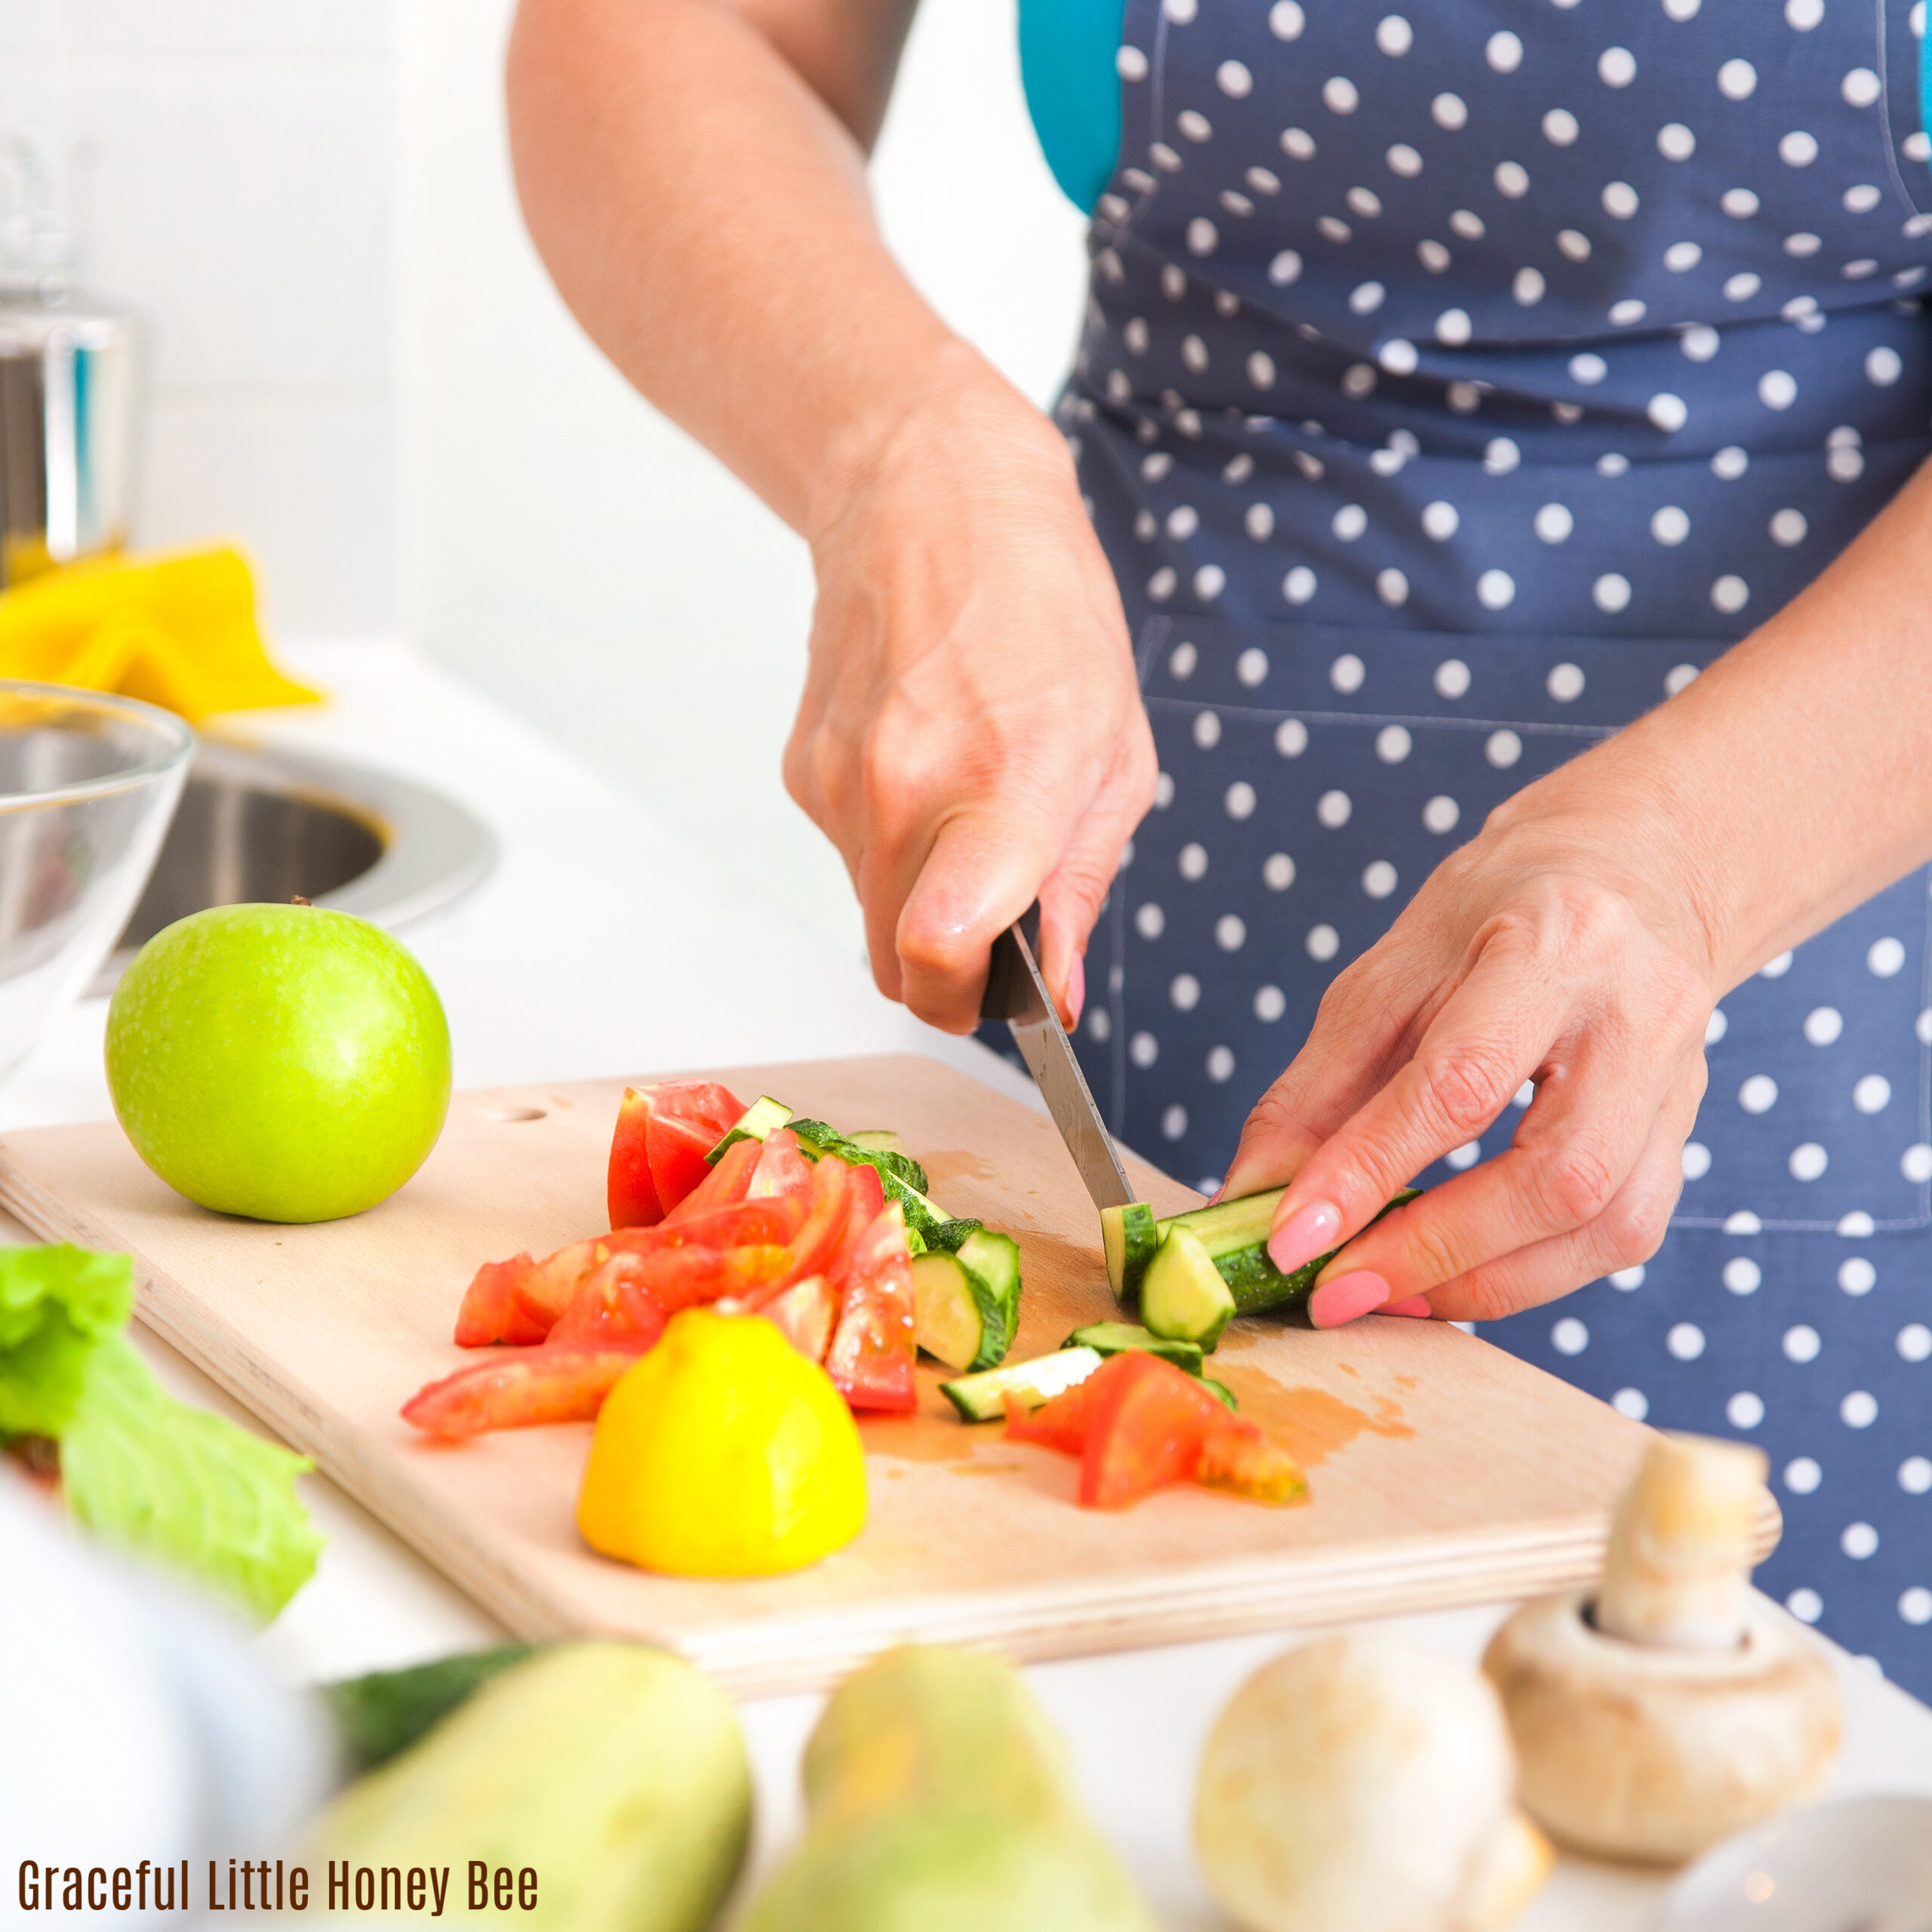 Woman slicing vegetables while wearing a blue apron with white polka dots.